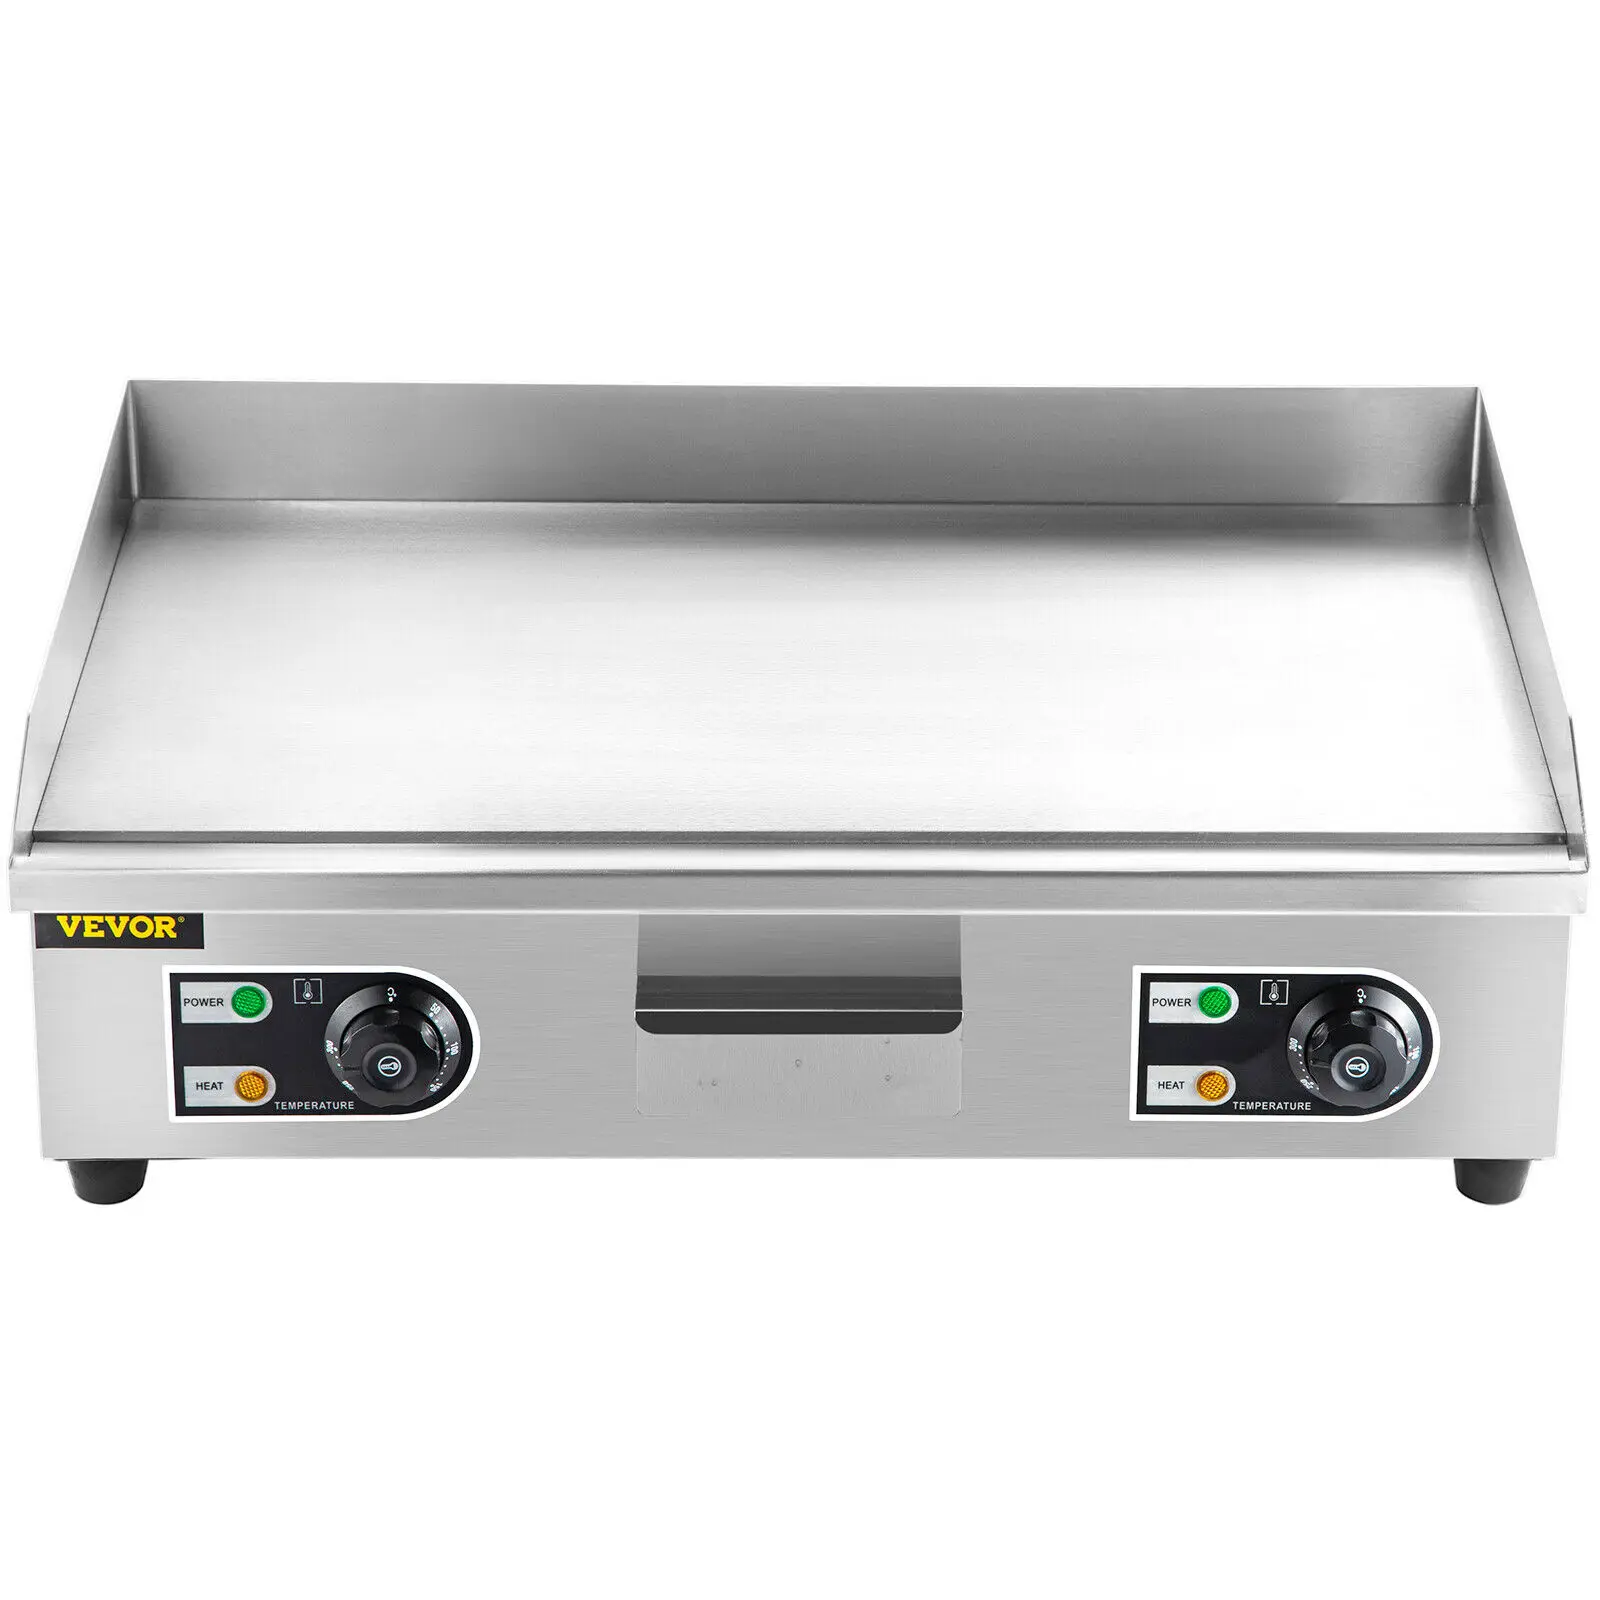 https://ae01.alicdn.com/kf/Hc7a0063fec59423d91b3a7caa12d94653/VEVOR-Electric-Countertop-Griddle-30inch-Stainless-Steel-Dual-Temp-Control-W-Drawer-Cooling-Holes-for-BBQ.jpg